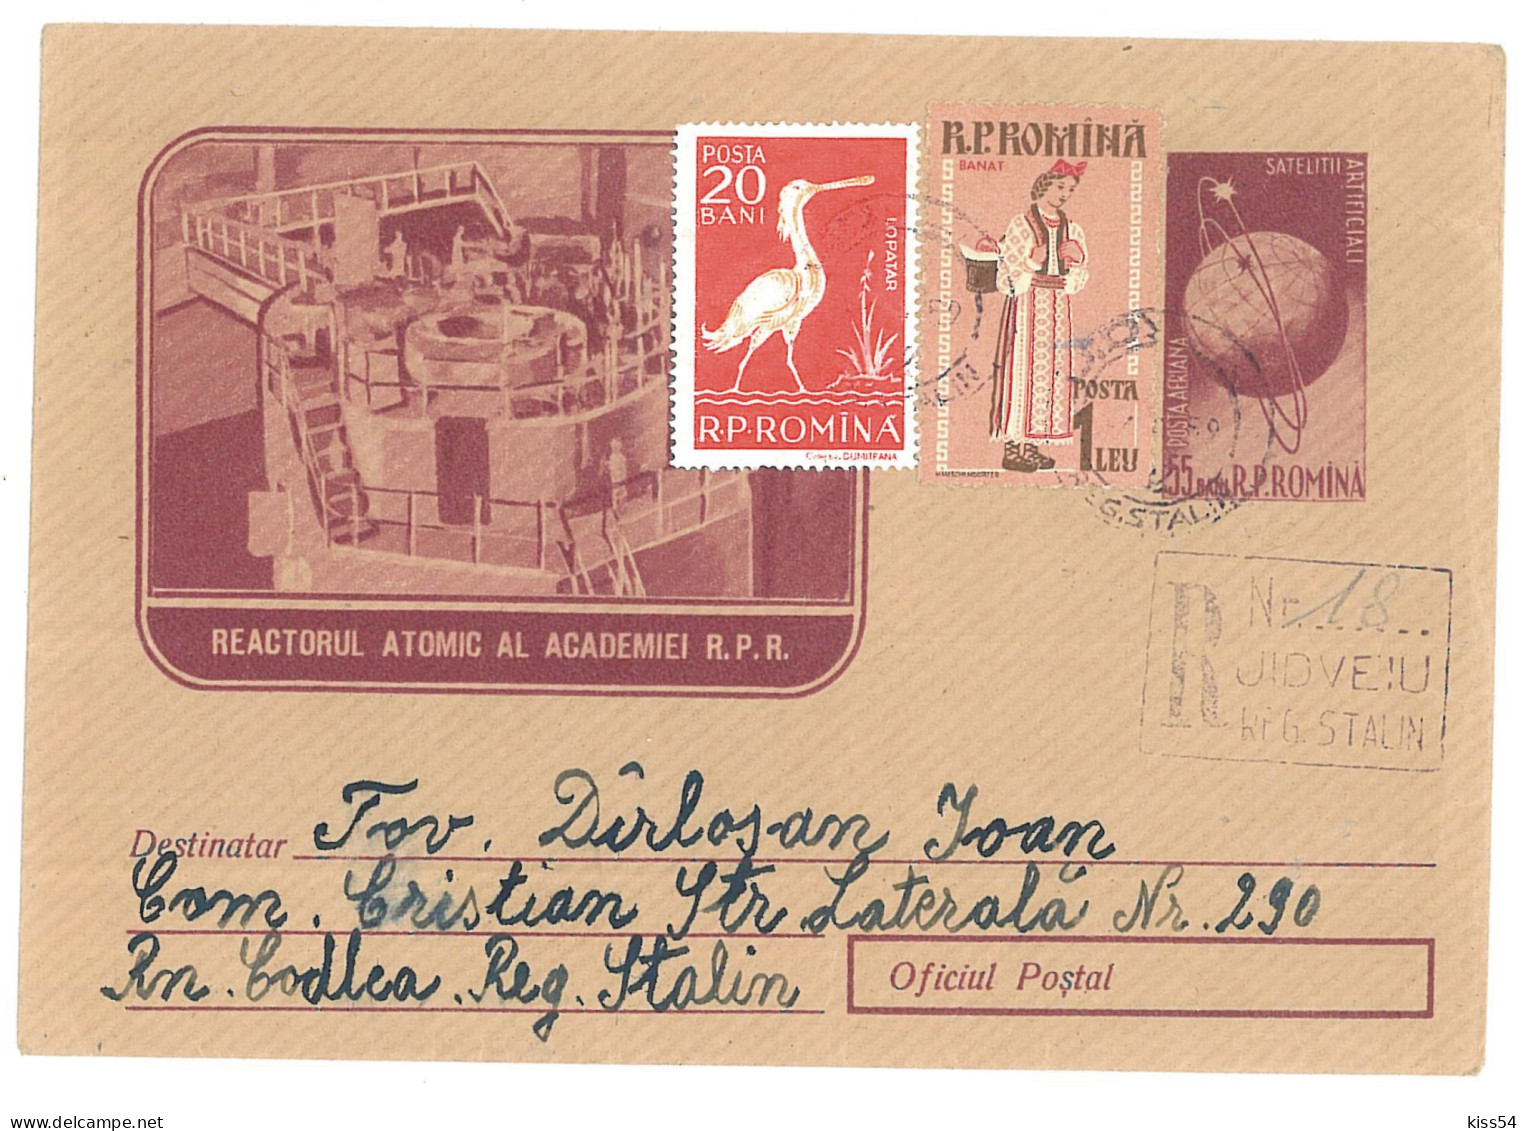 IP 58 A - 0119d-b ENERGY, Atomic Reactor, Romania - REGISTERED Stationery - Used - 1958 - Atomenergie